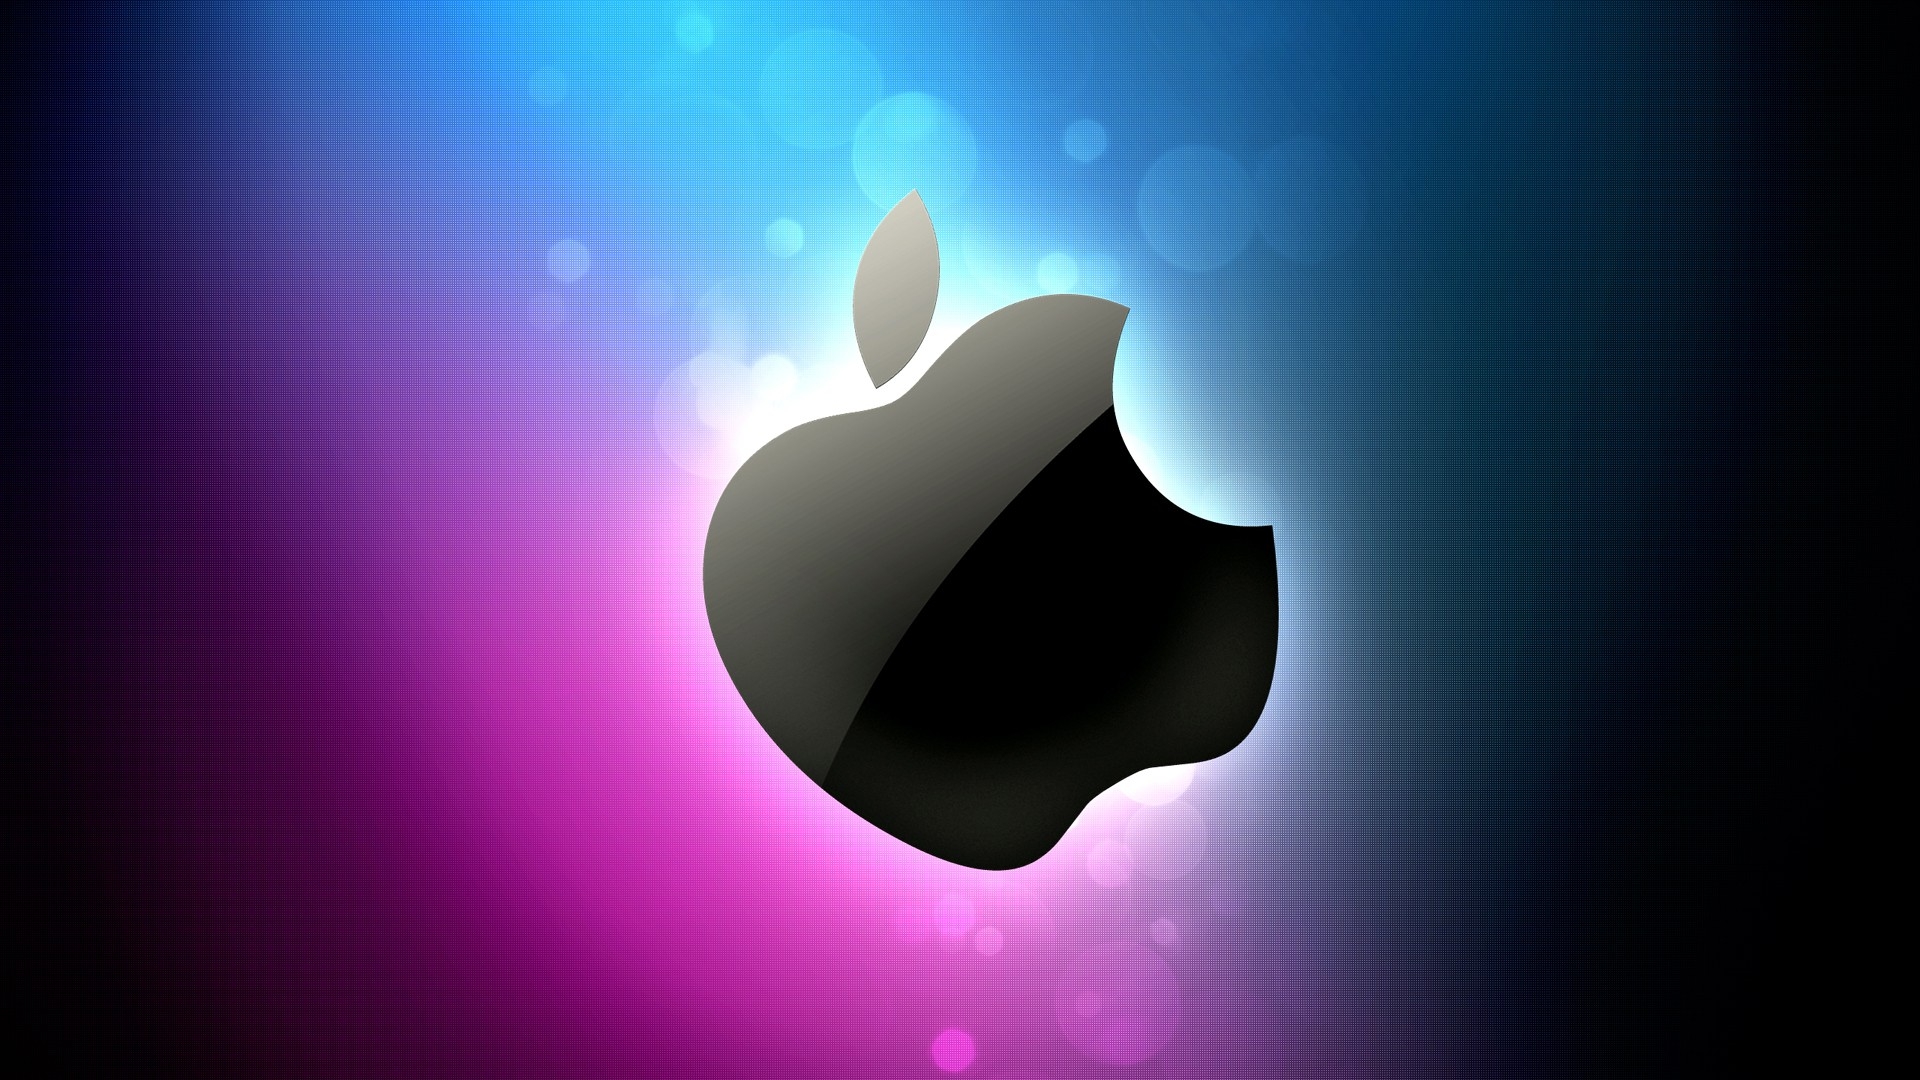 Free Download Apple Logo Wallpapers Hd 1920x1080 For Your